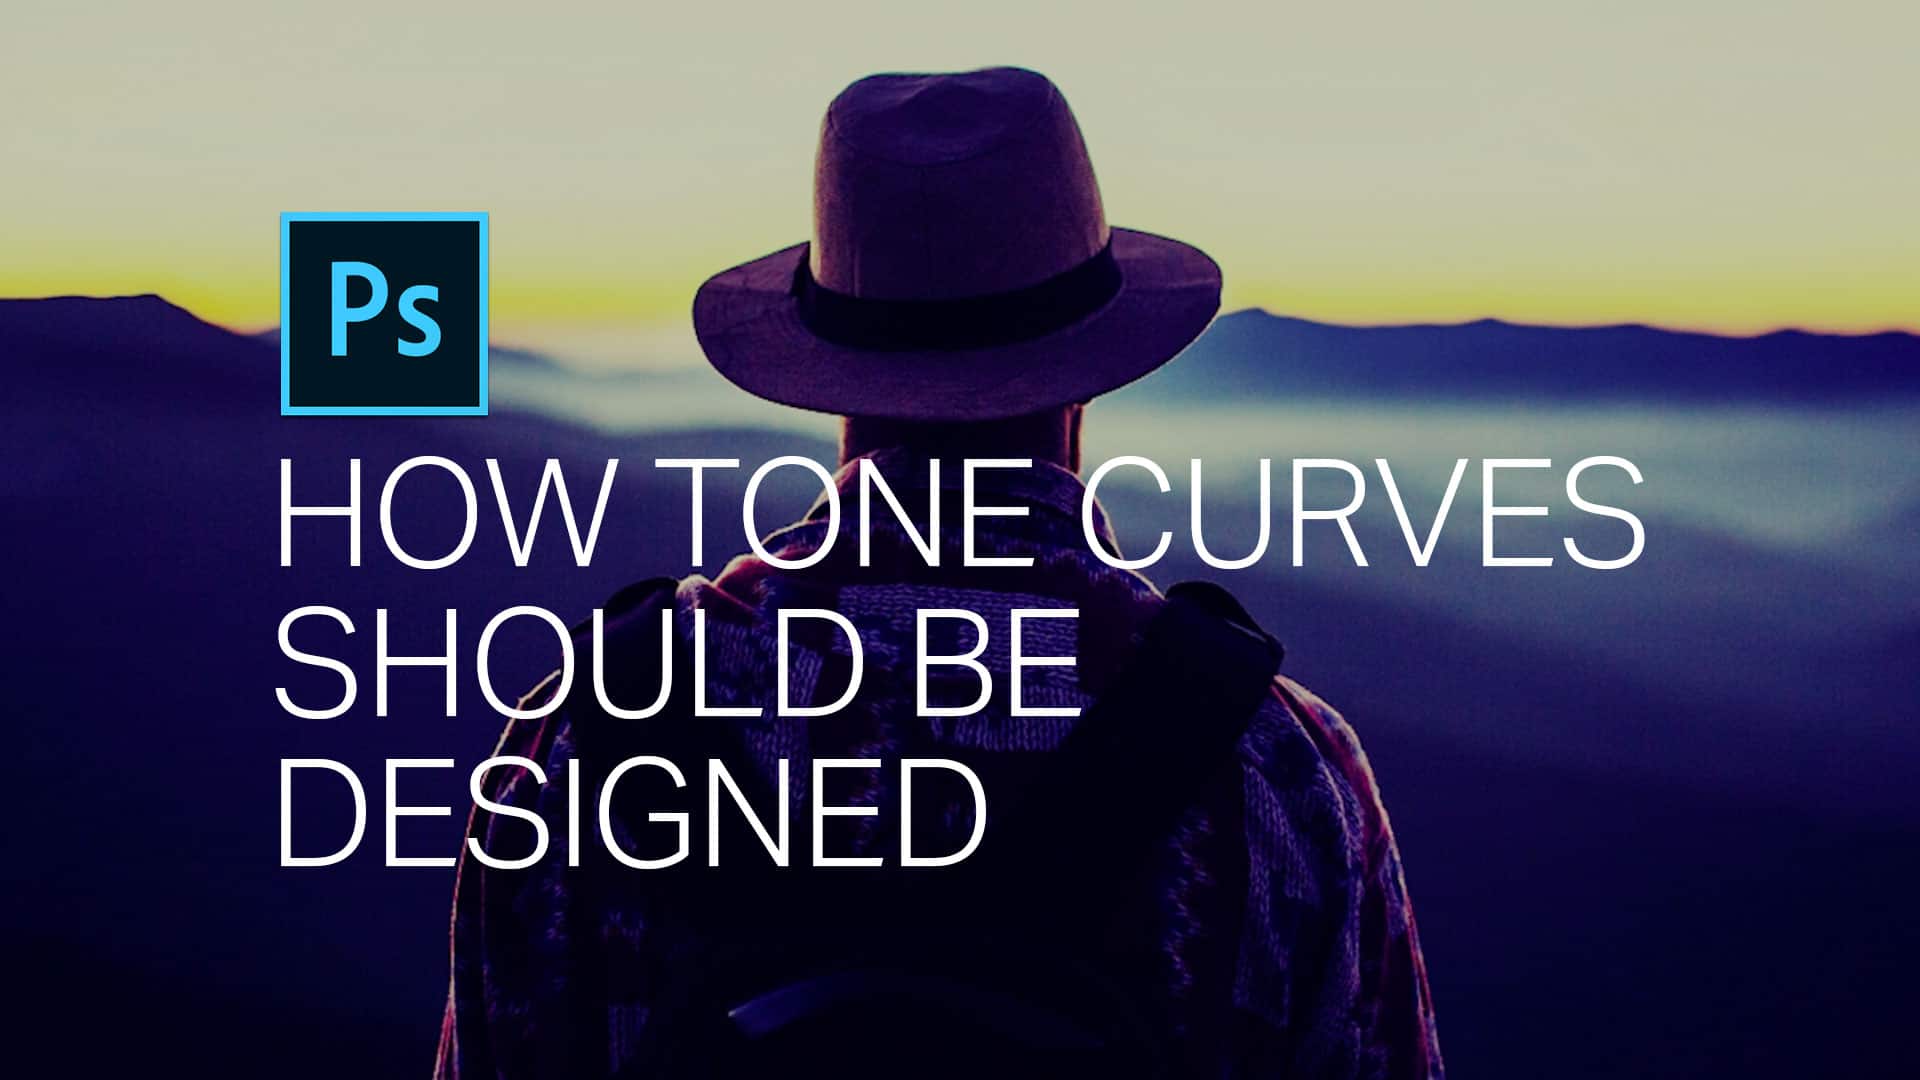 Dear Adobe, How to Redesign the Tone Curve